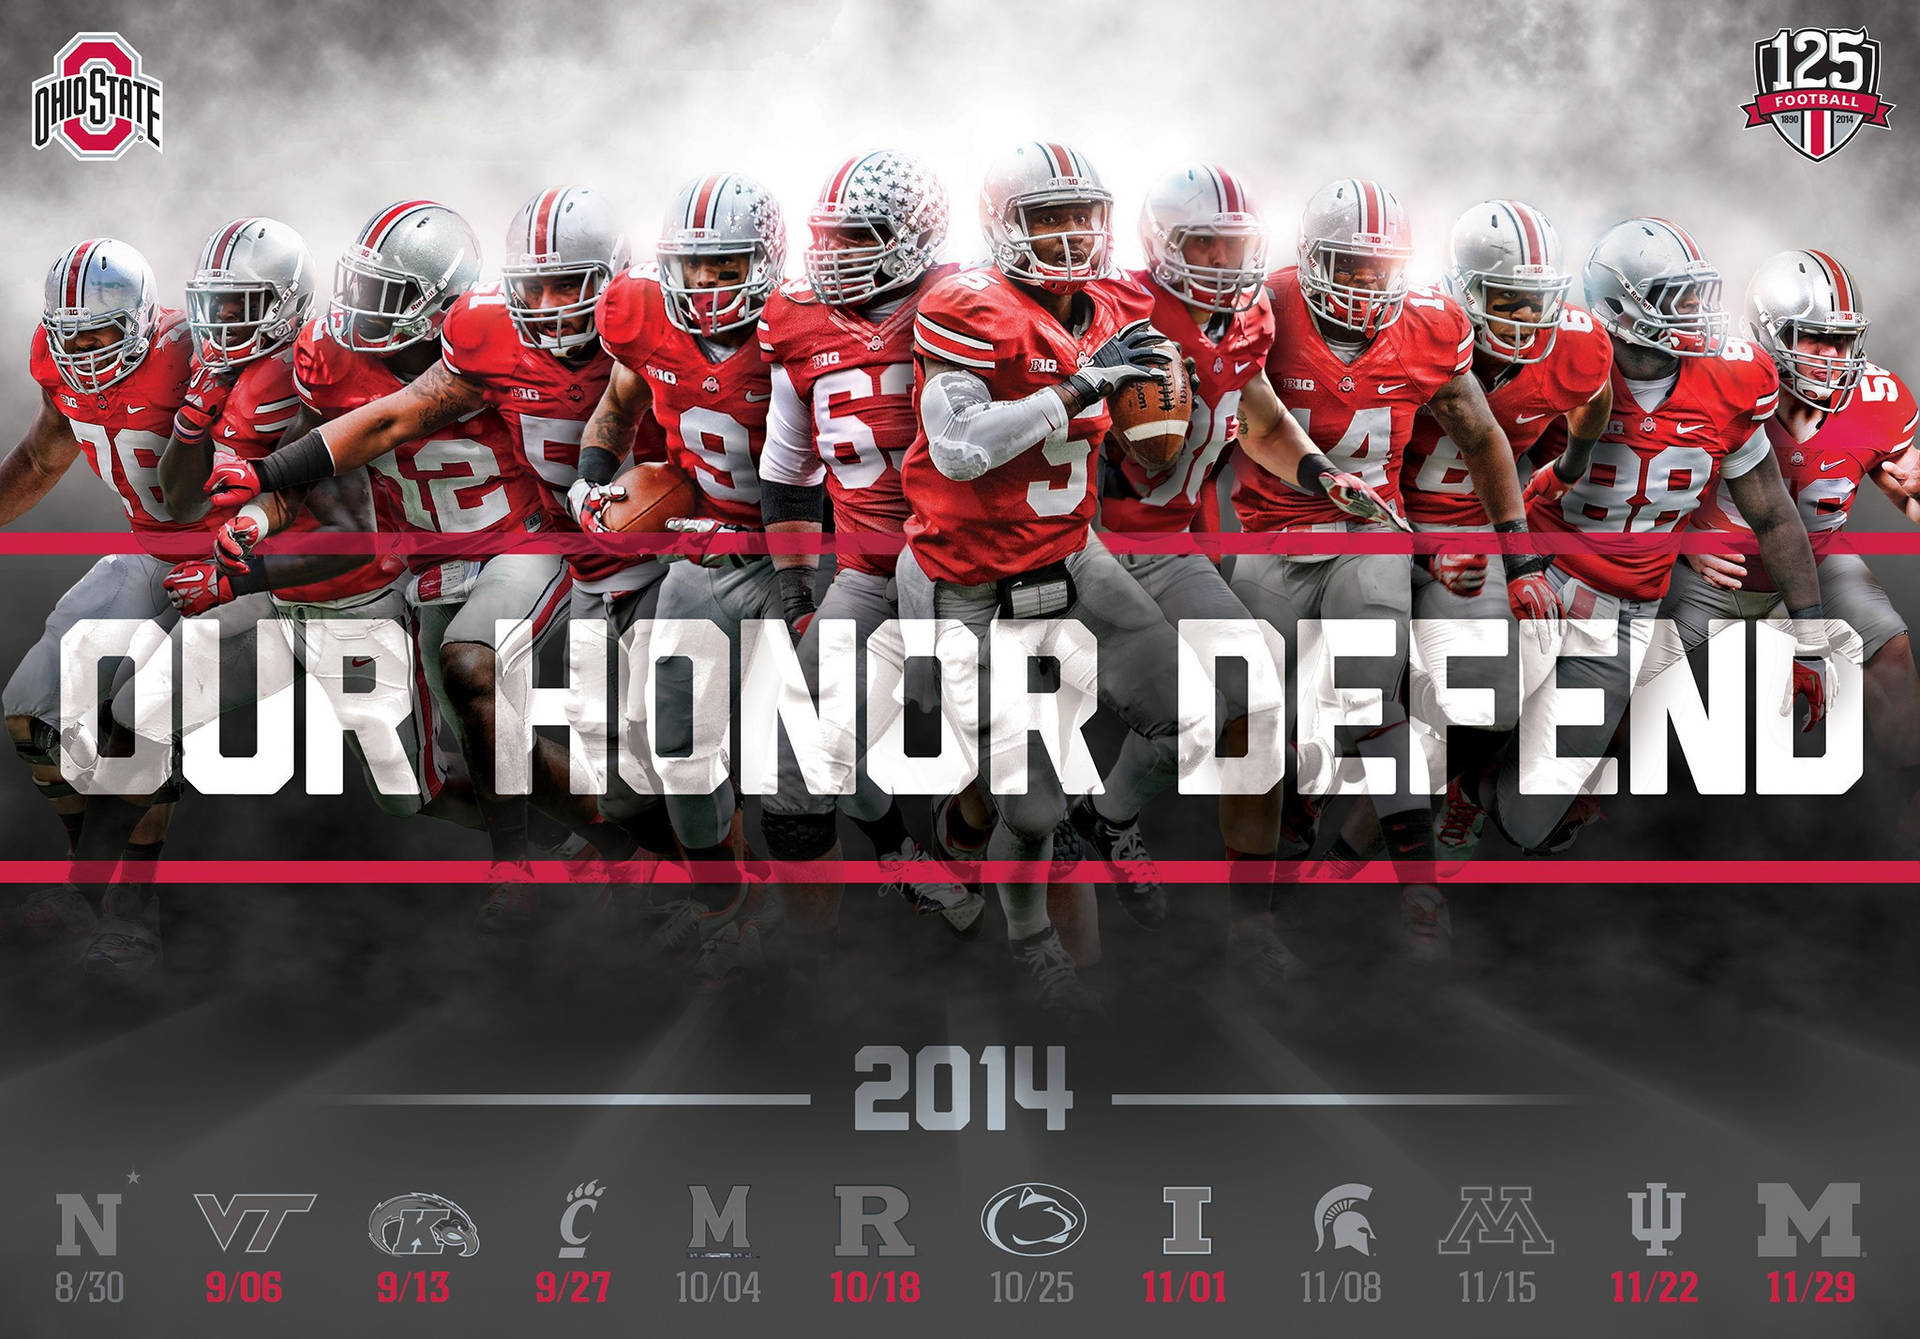 Ohio State University Our Honor Defend Wallpaper